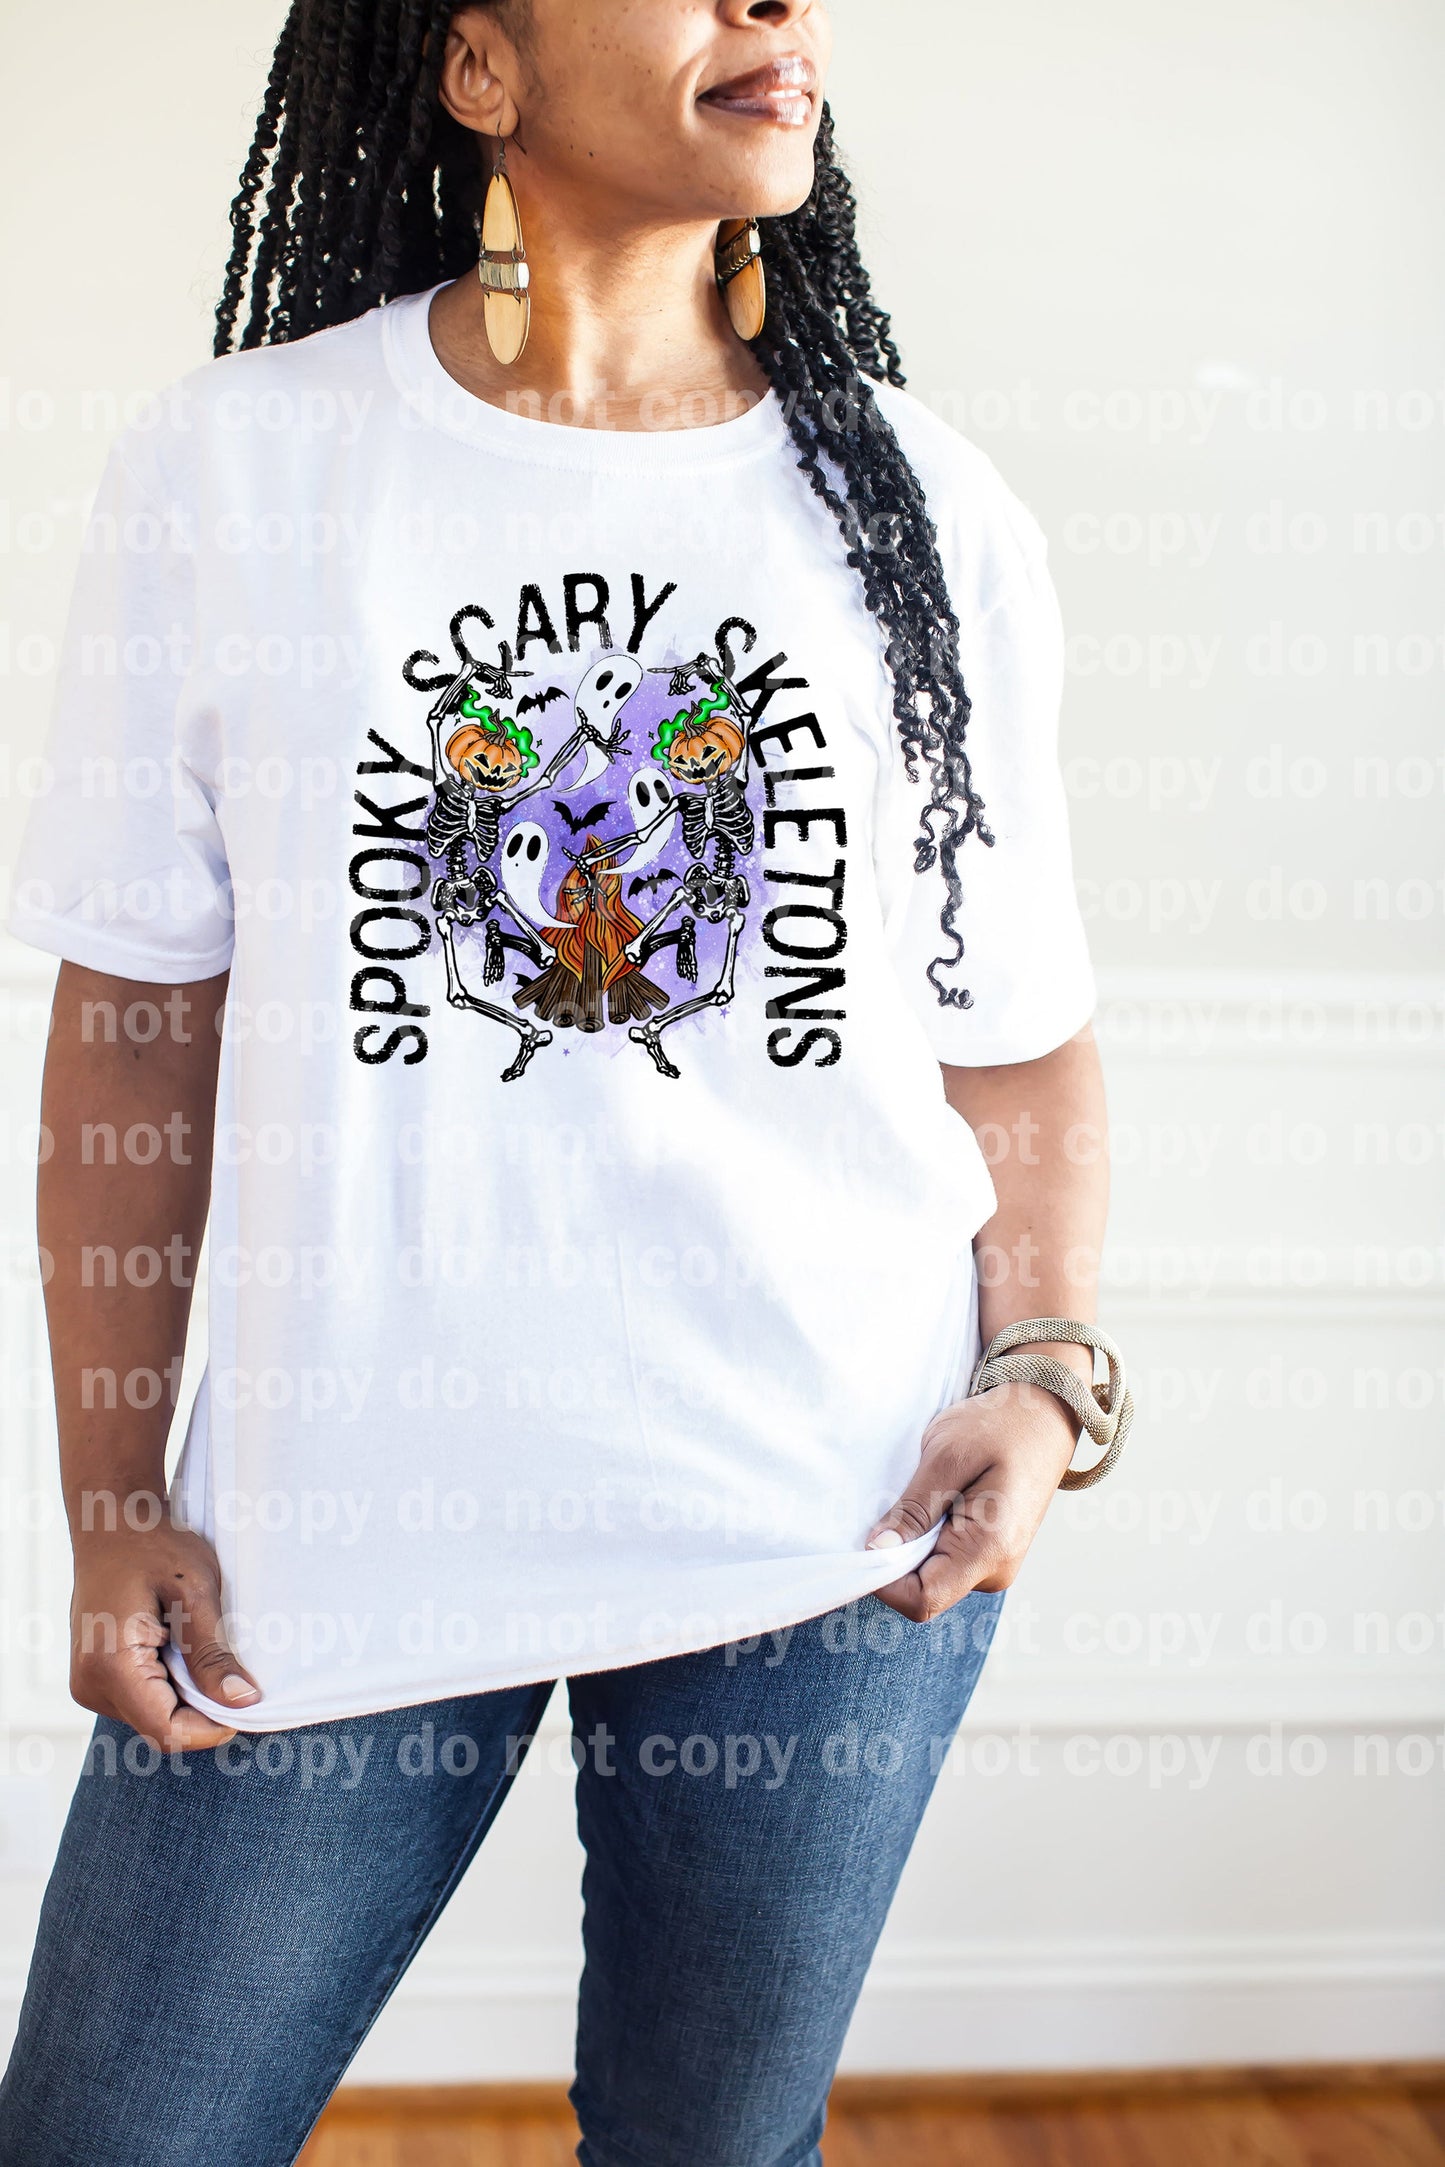 Spooky Scary Skeletons with Pocket Option Dream Print or Sublimation Print